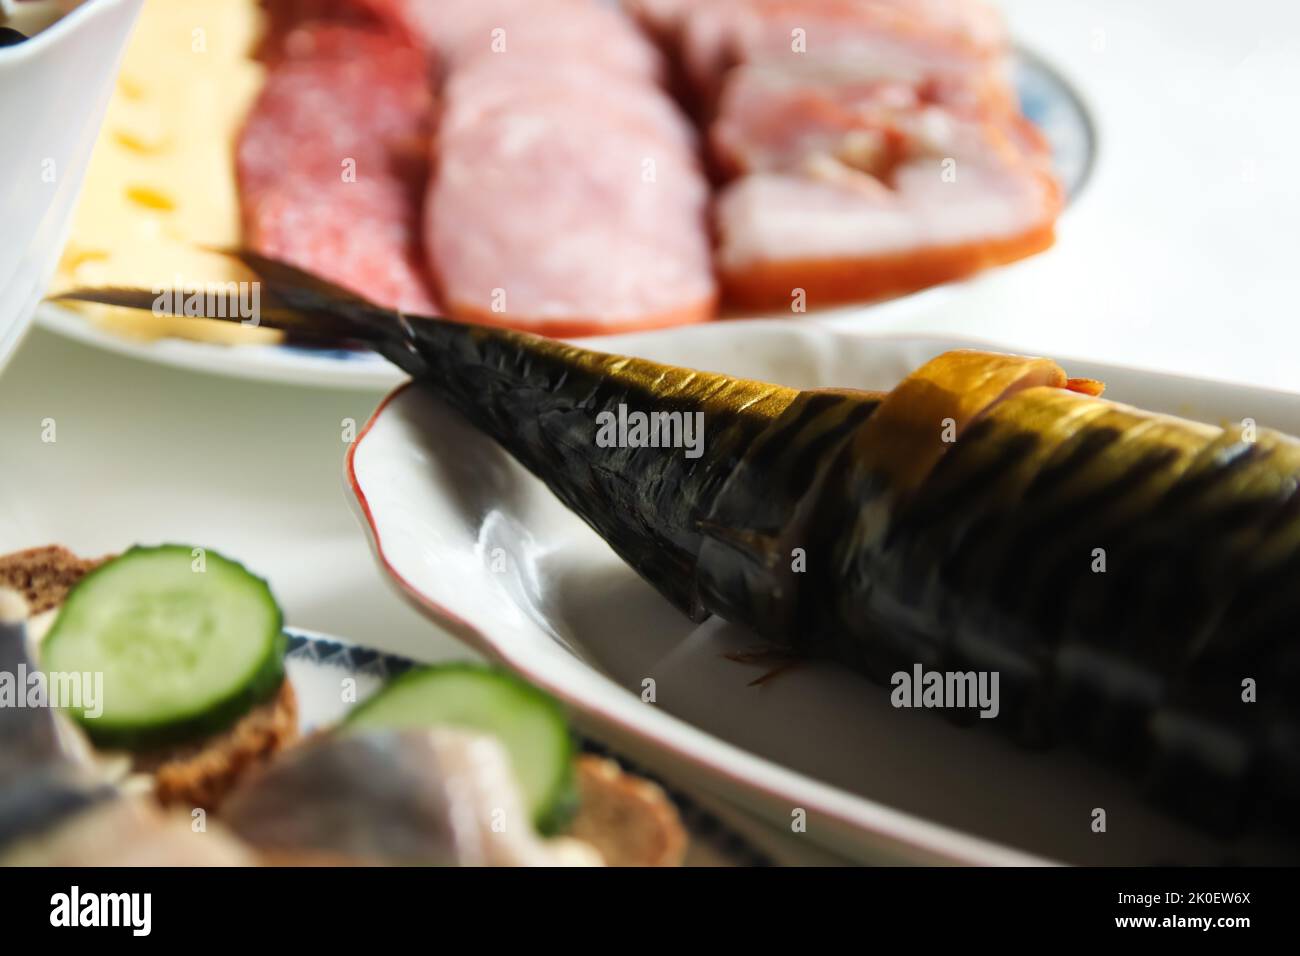 Defocus smoked mackerel. Smoked fish with spices on dark background on holiday table. Closeup. Fish bonito. Out of focus. Stock Photo